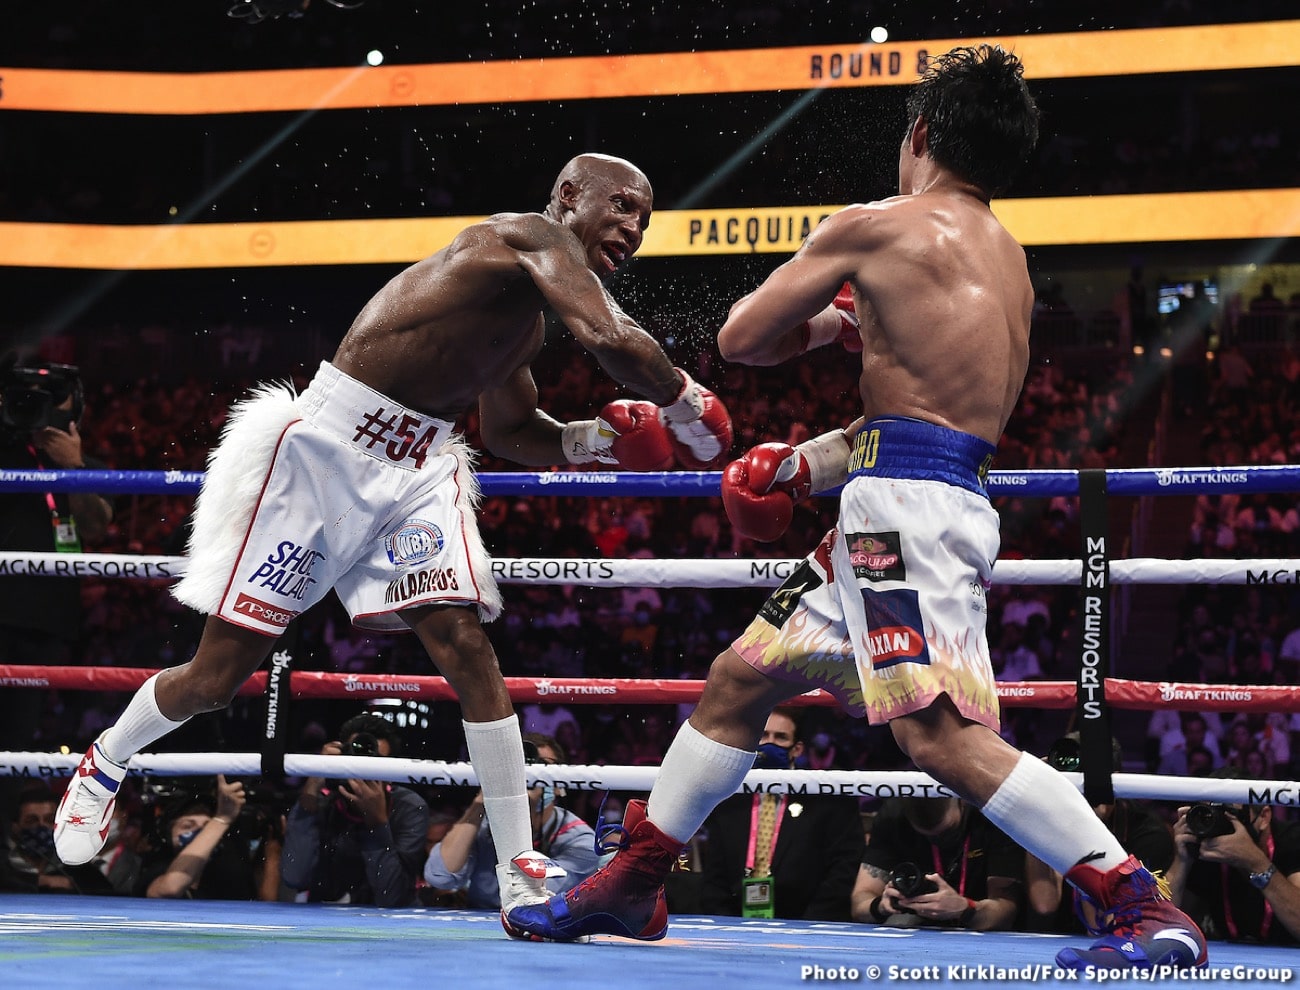 Image: Yordenis Ugas shows class, tells Pacquiao he can have rematch